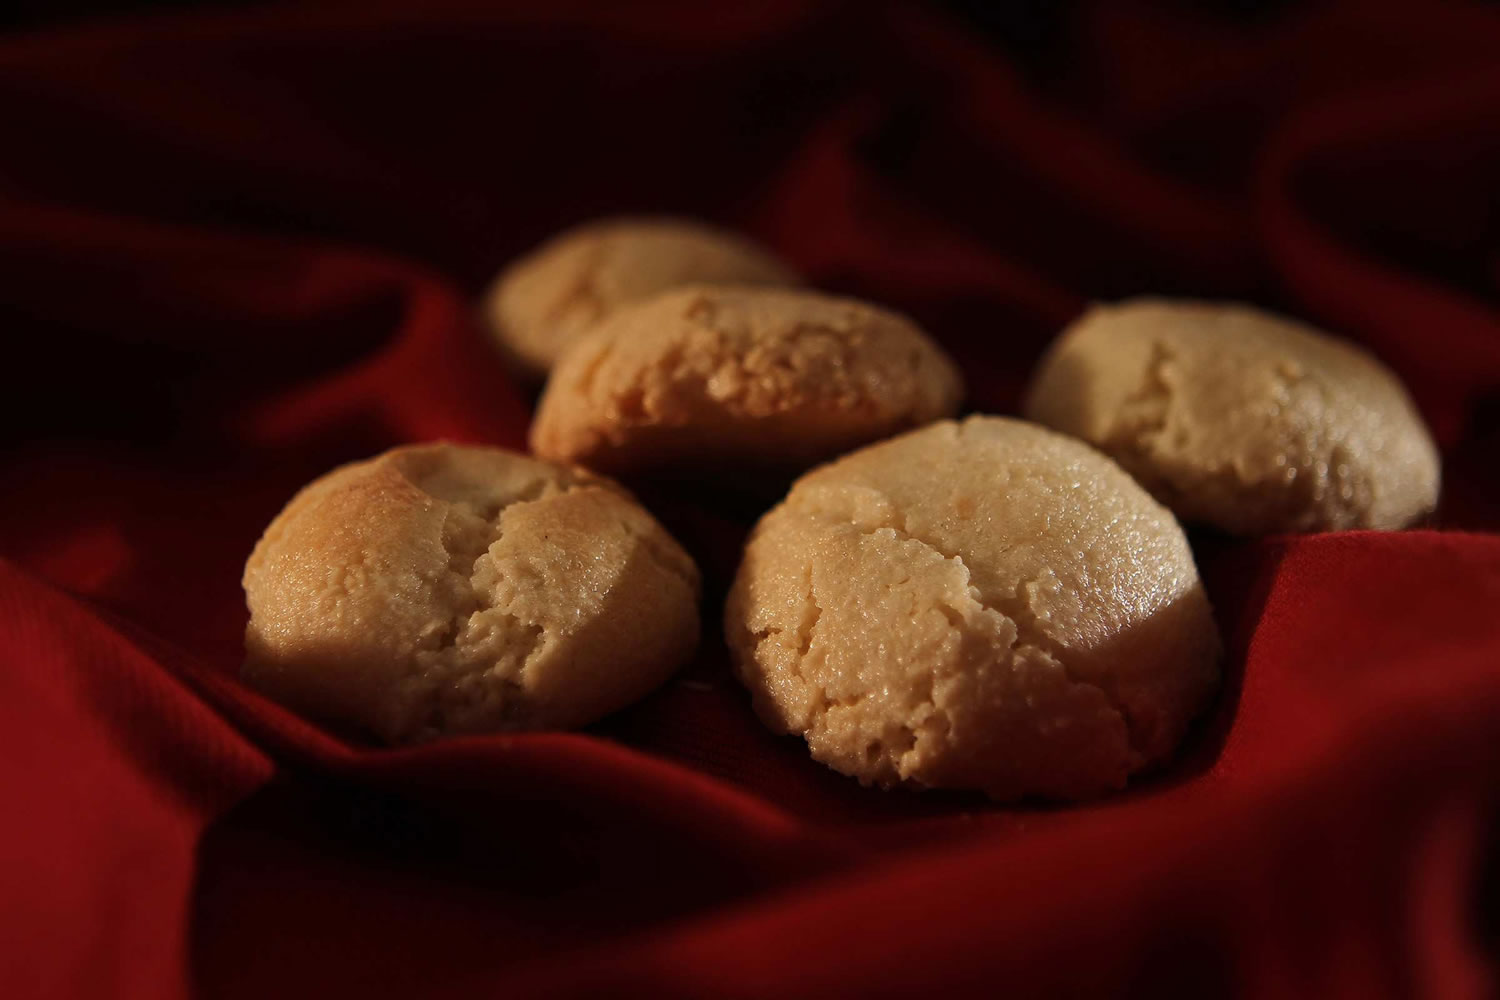 Almond macaroons are easy to make, crunchy on the outside, tender in the middle and pair well with fruit.